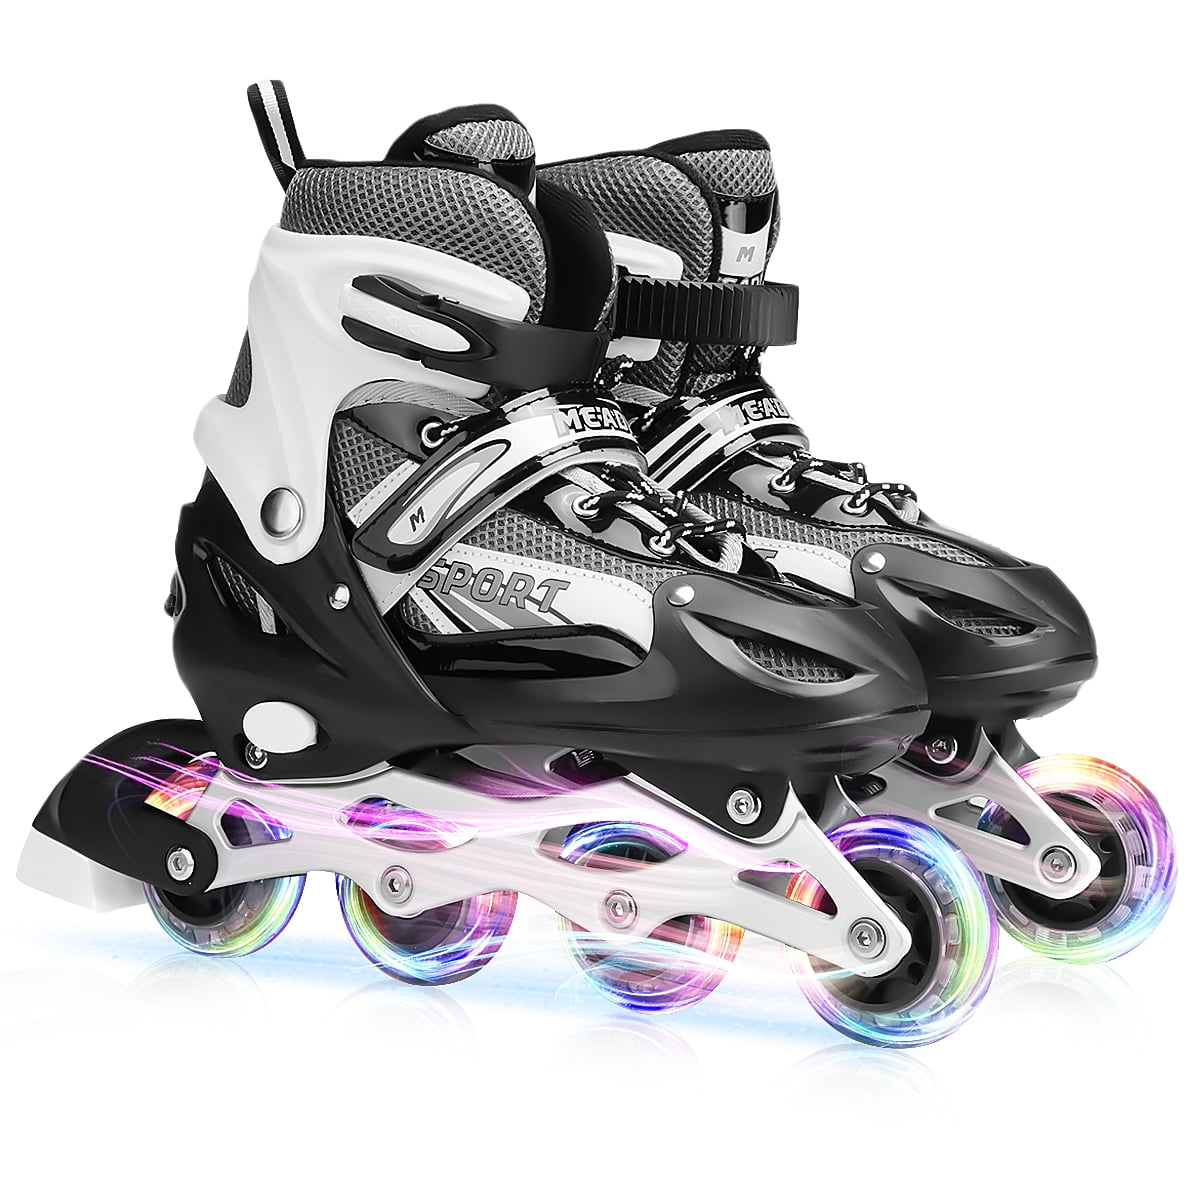 Skates Inline Carbon Fiber Straight Row Wheel Adult Men and Women Speed Skating Shoes Children Professional Single Row Speed Skating Roller 